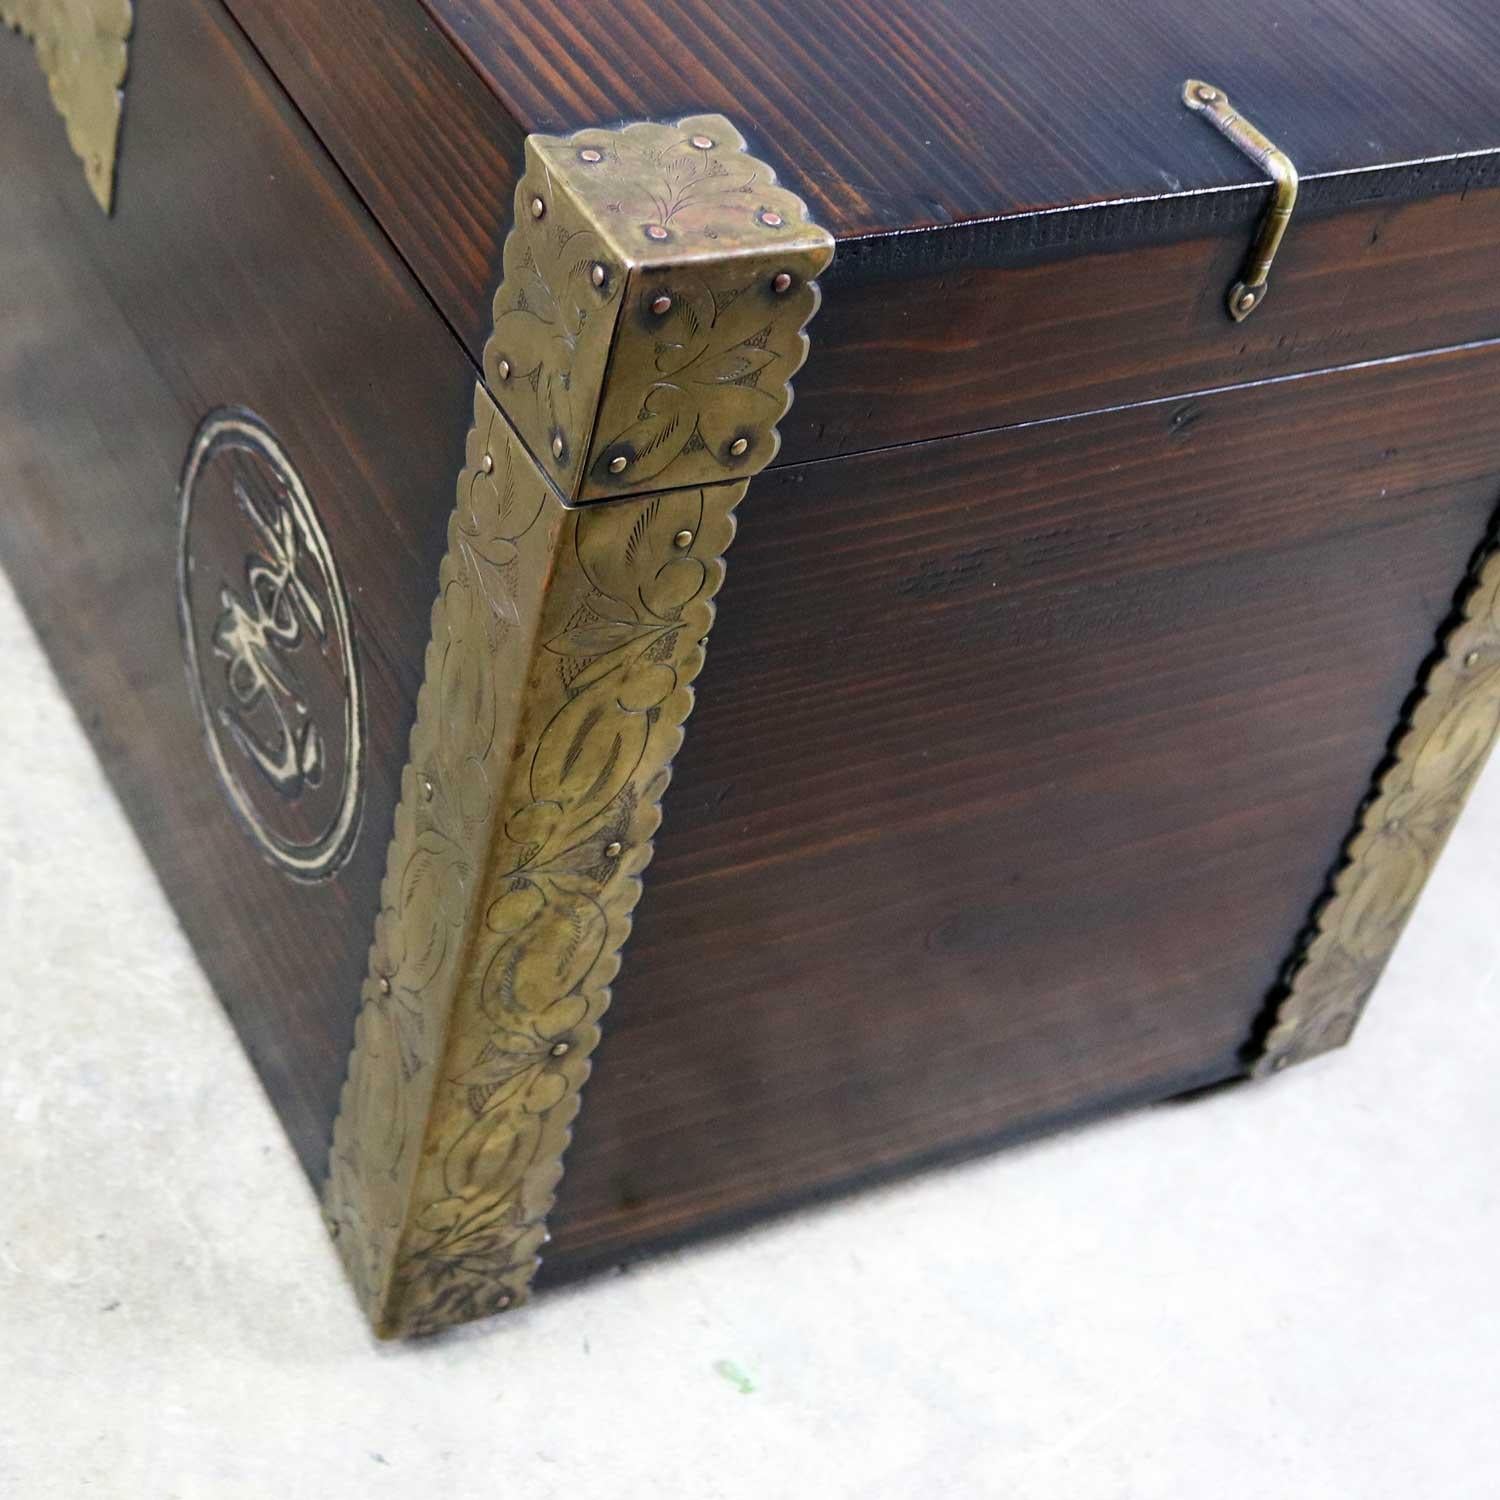 Antique Korean Trunk Chest or Box circa 1920s with Luck and Longevity Characters For Sale 2